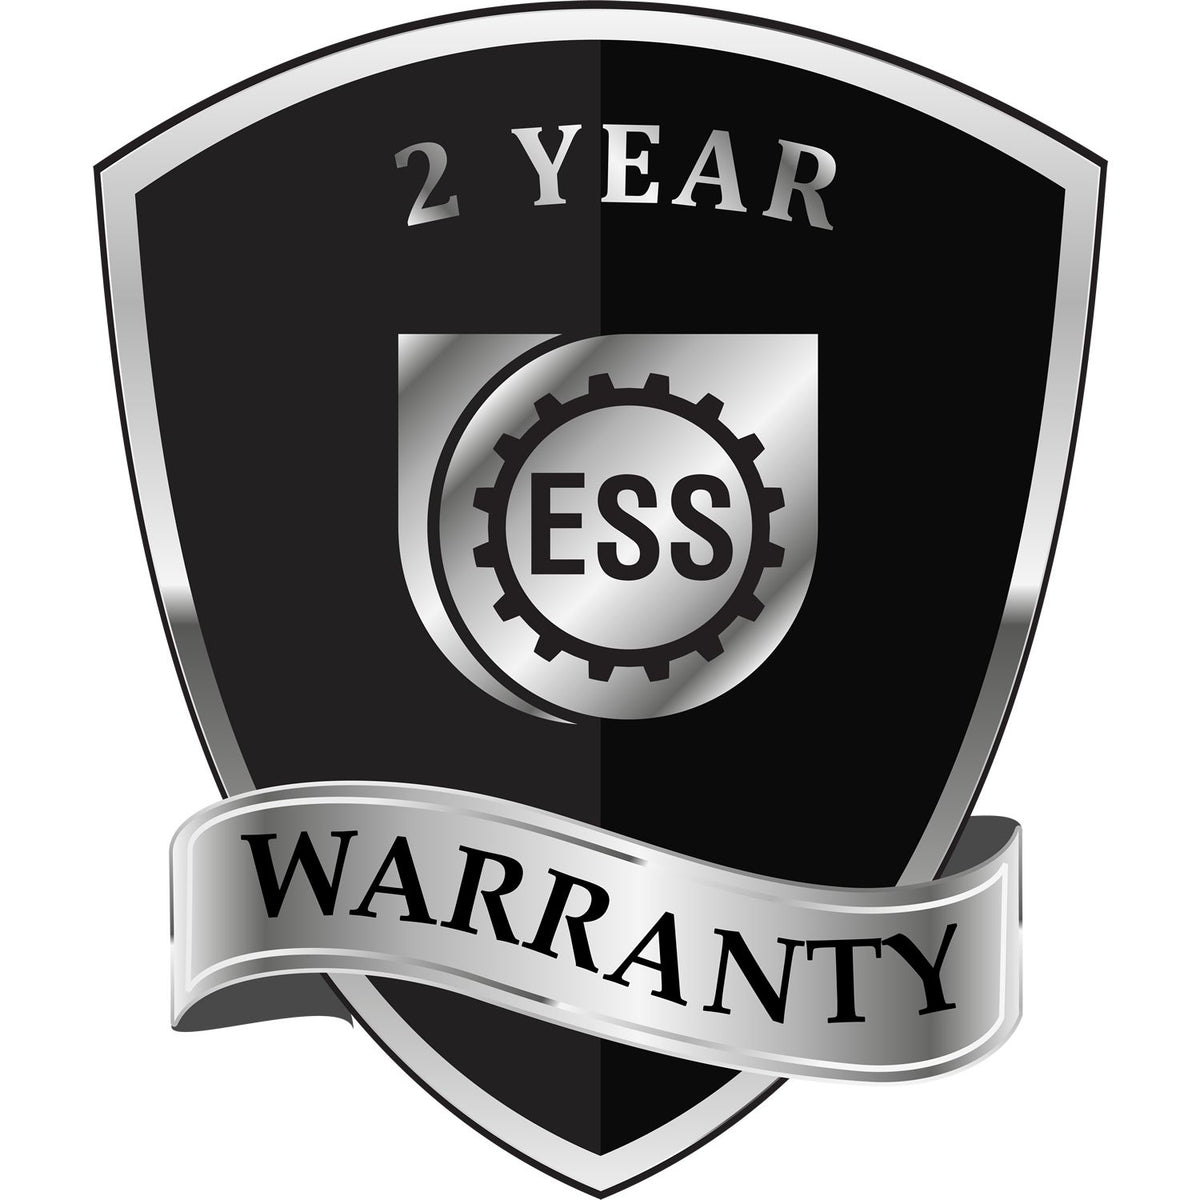 A black and silver badge or emblem showing warranty information for the Gift Illinois Geologist Seal